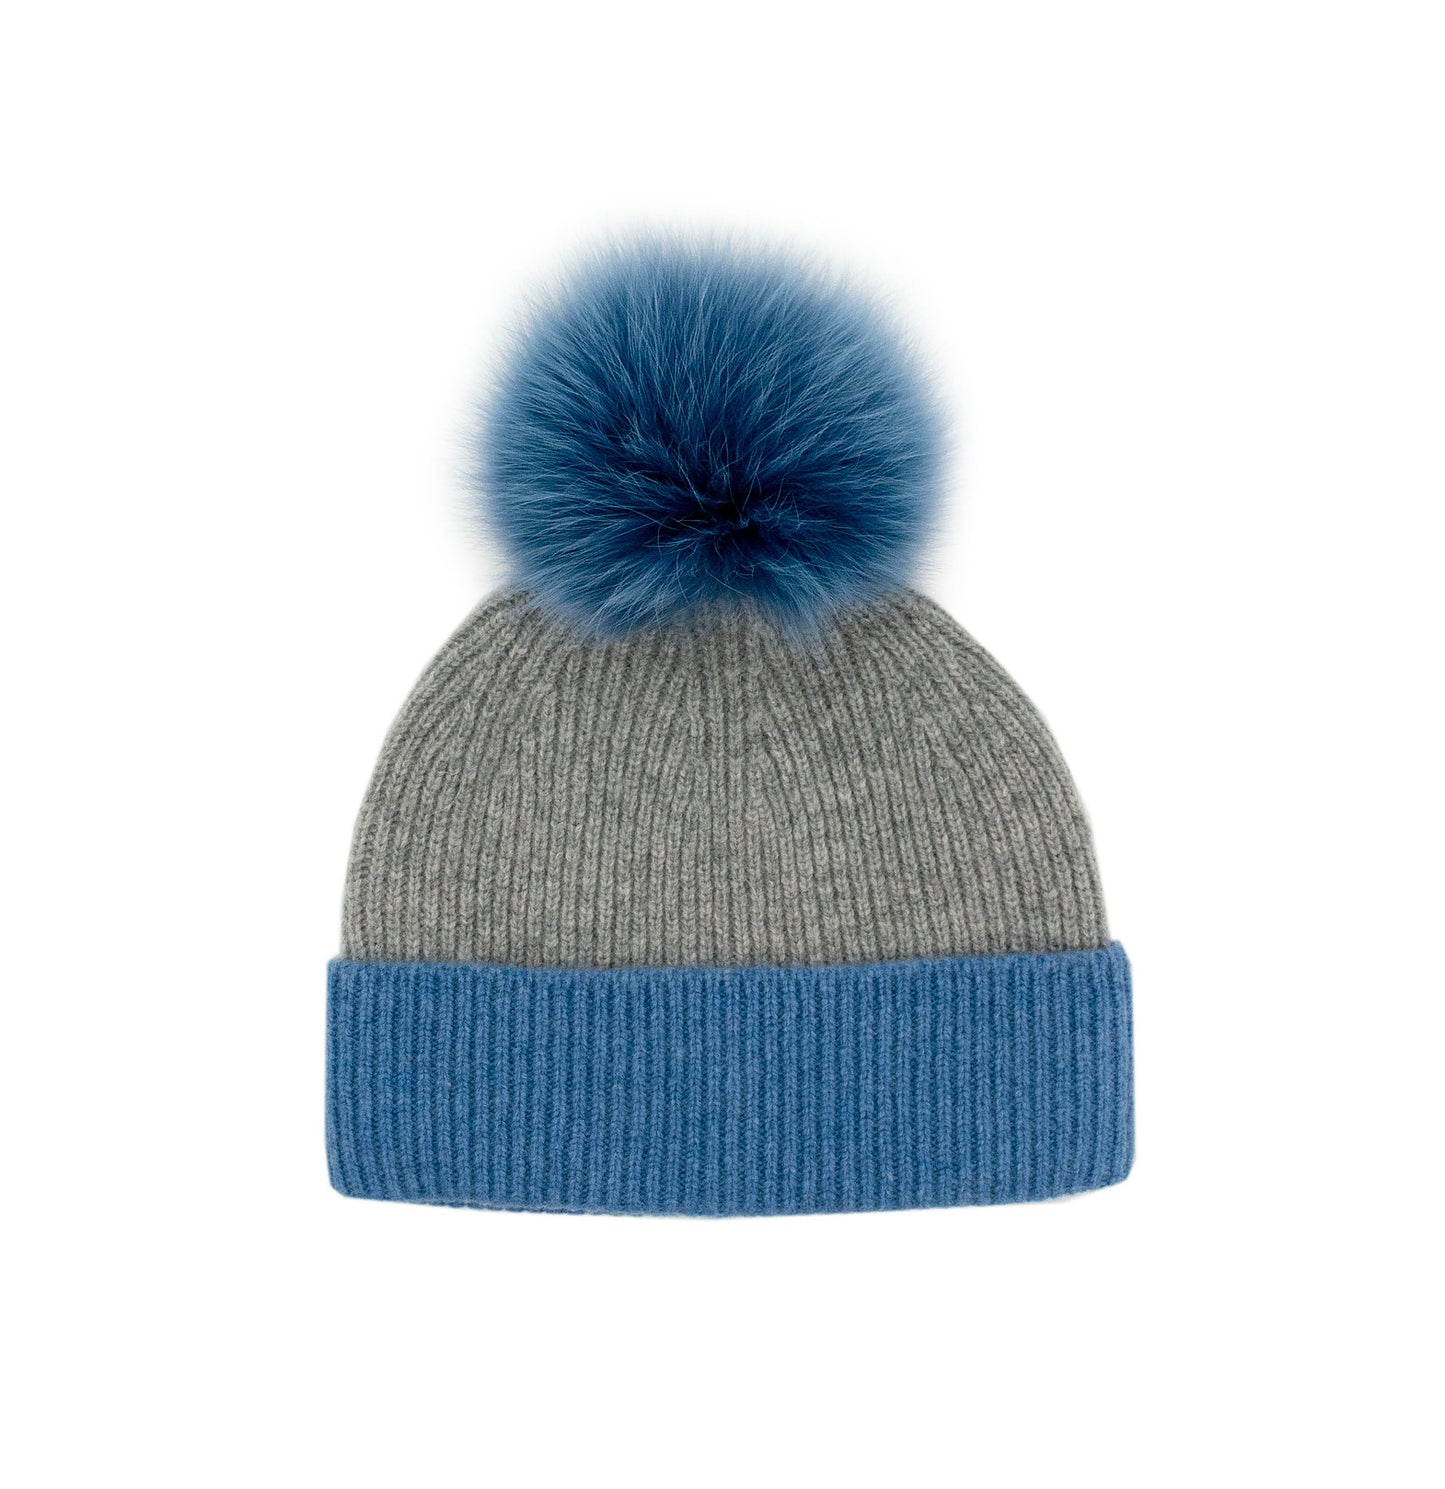 Mitchie's Two Tone Knit Hat